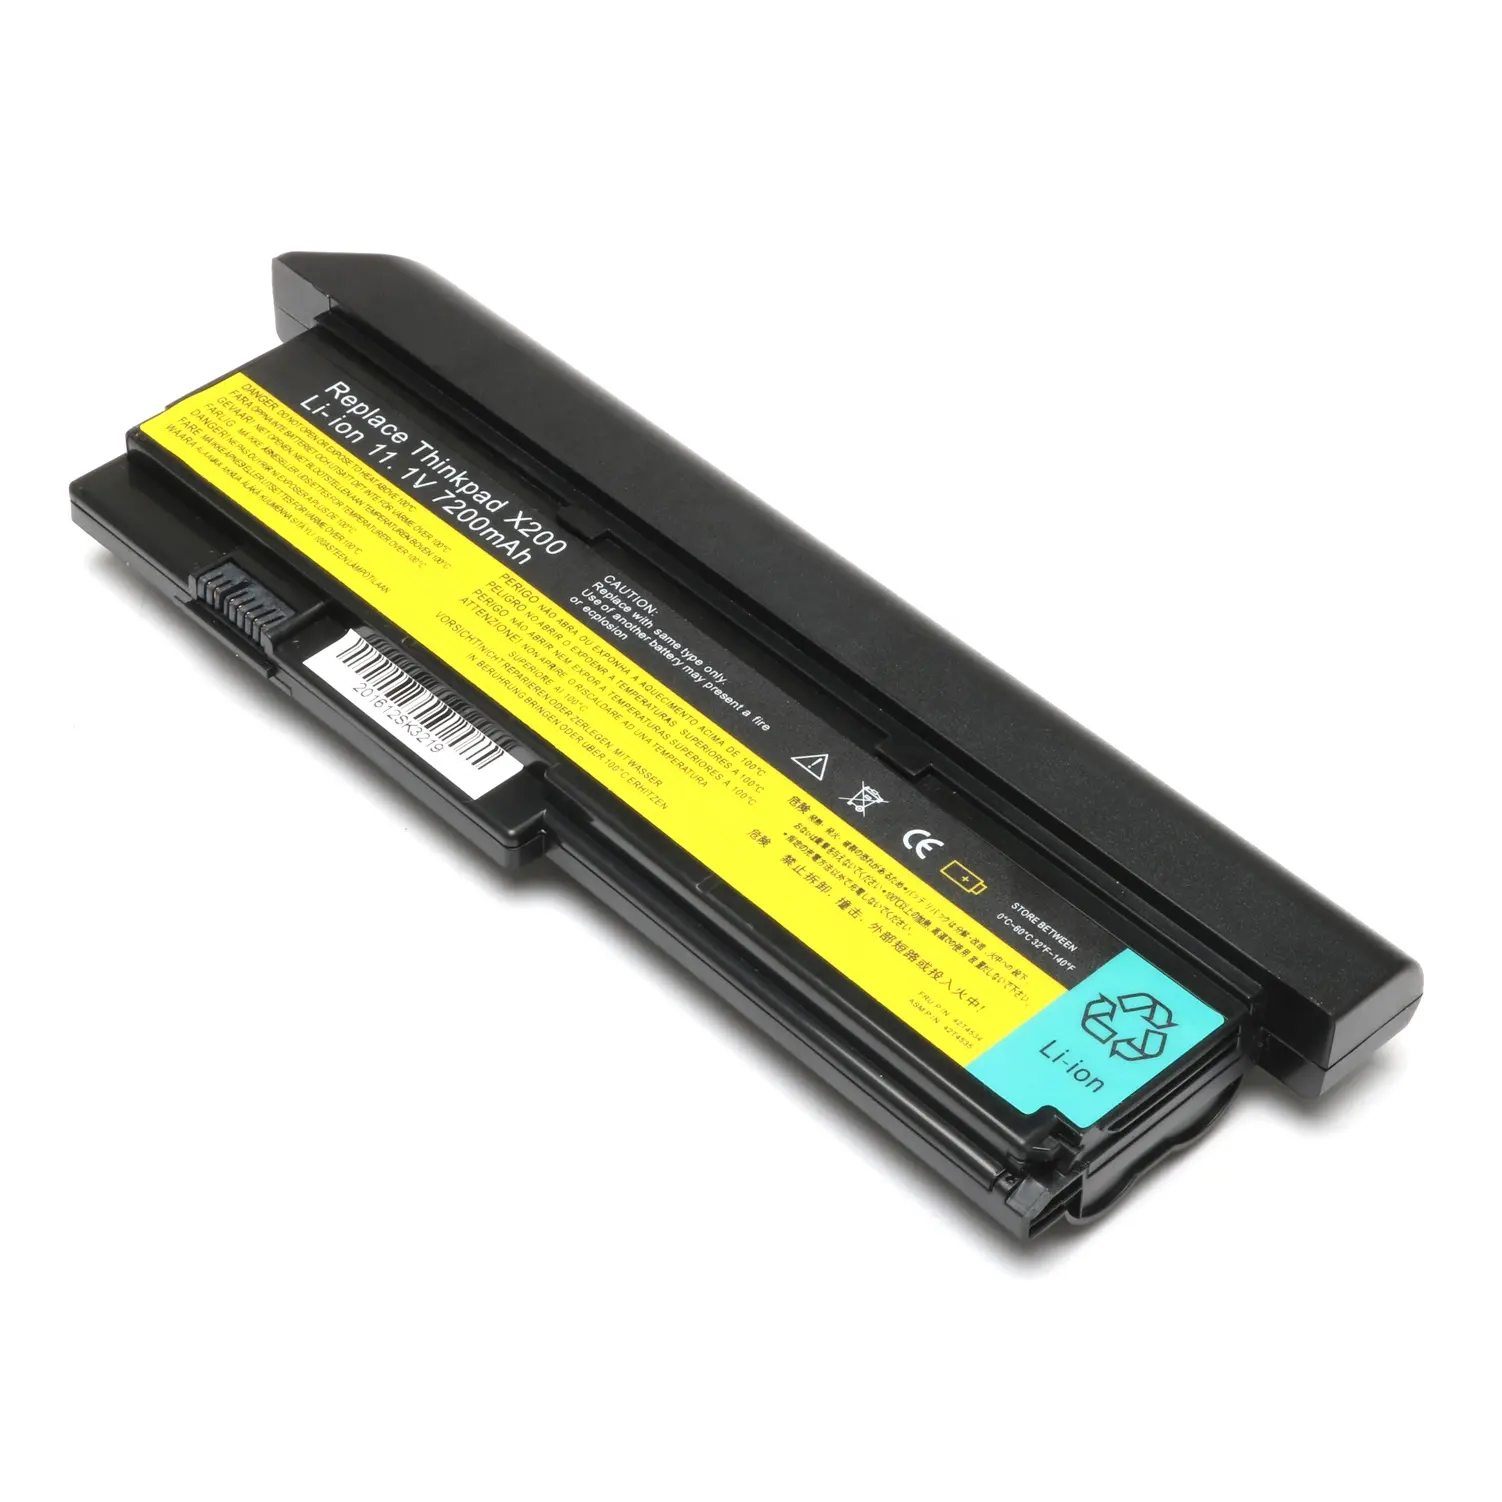 80WH 11.1V 7200MAH rechargeable laptop battery for LENOVO/ IBM X200 Tablet X200 X200t X201 X201t 43R9257 43R9256 42T4564 FRU